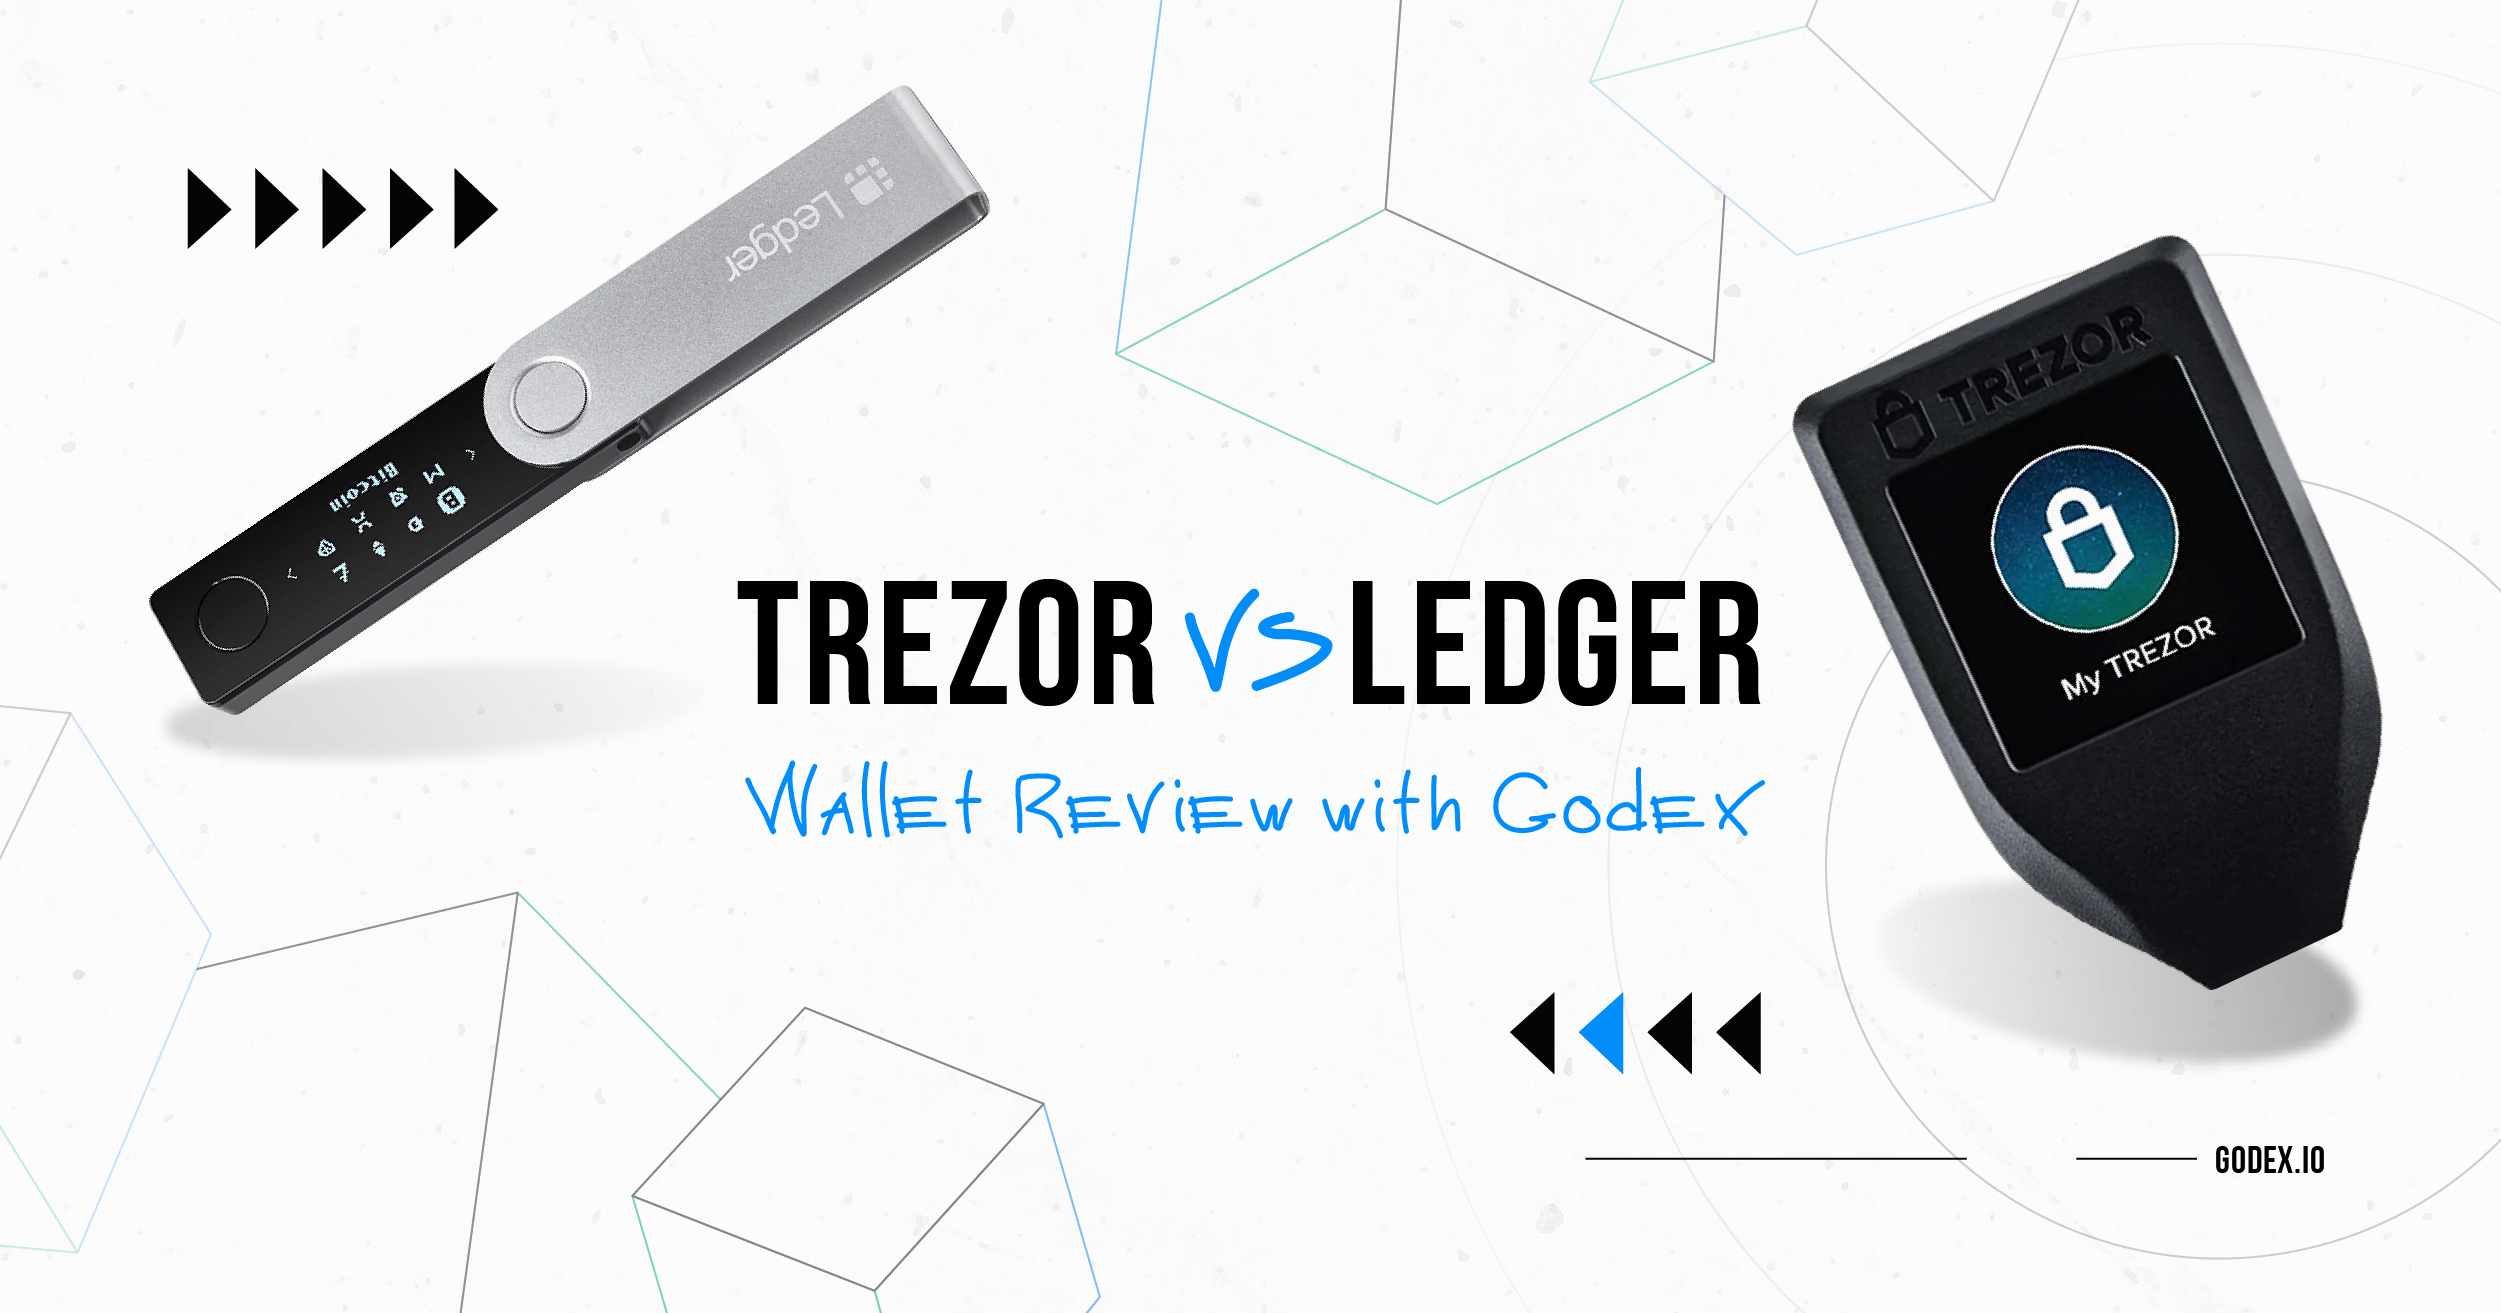 Trezor hardware wallet is vulnerable to hacking - Asia Times